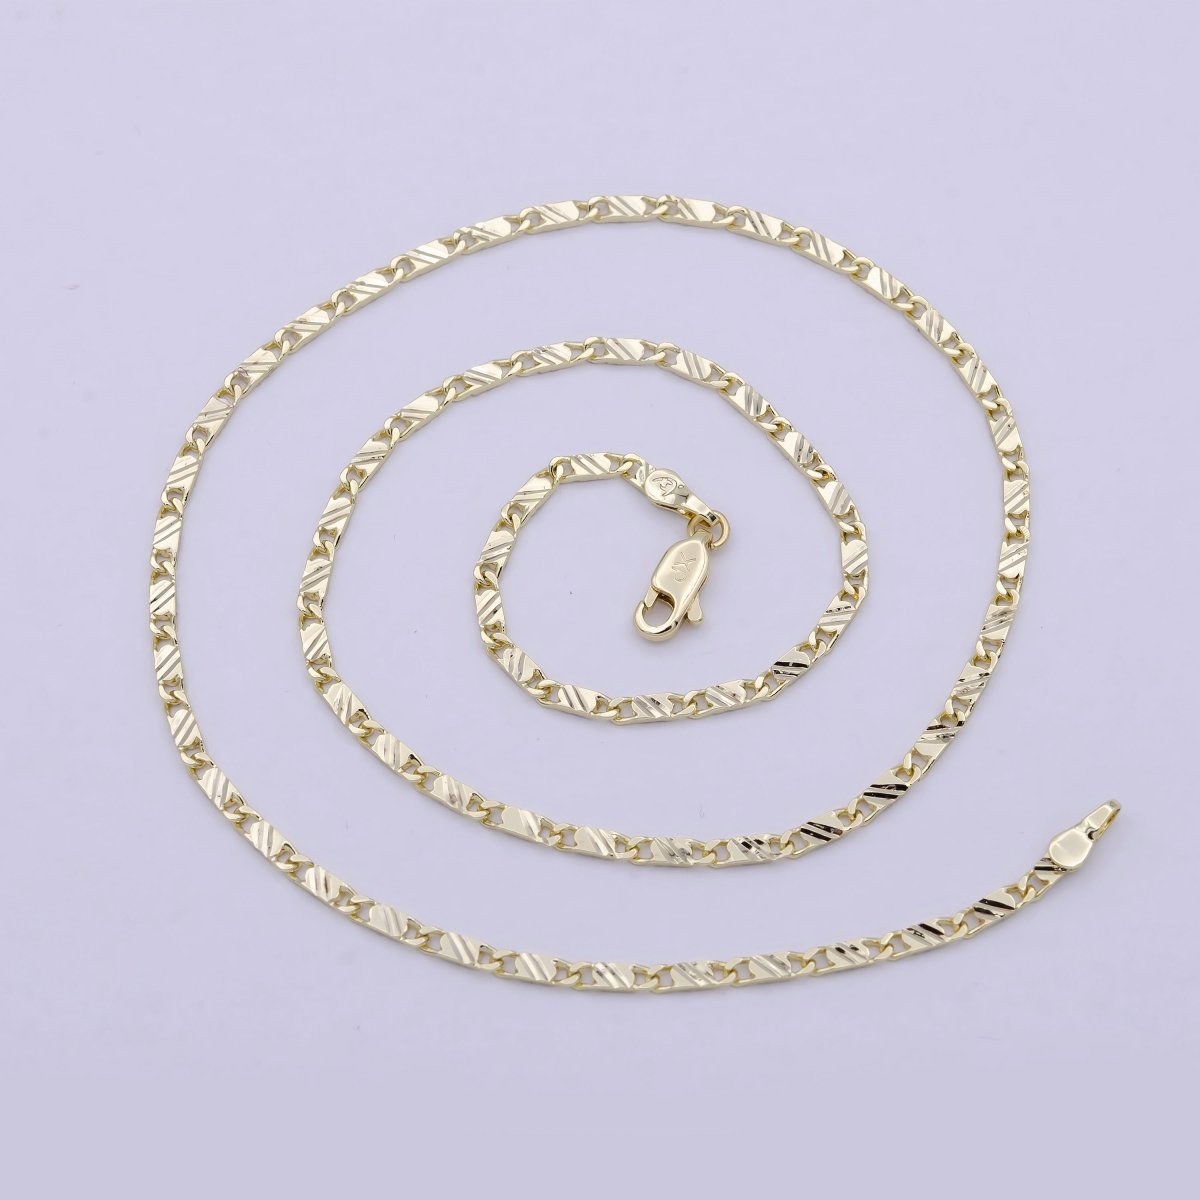 Dainty 14K Gold Filled Scroll Chain for Woman Necklace 17 inch | WA-801 Clearance Pricing - DLUXCA